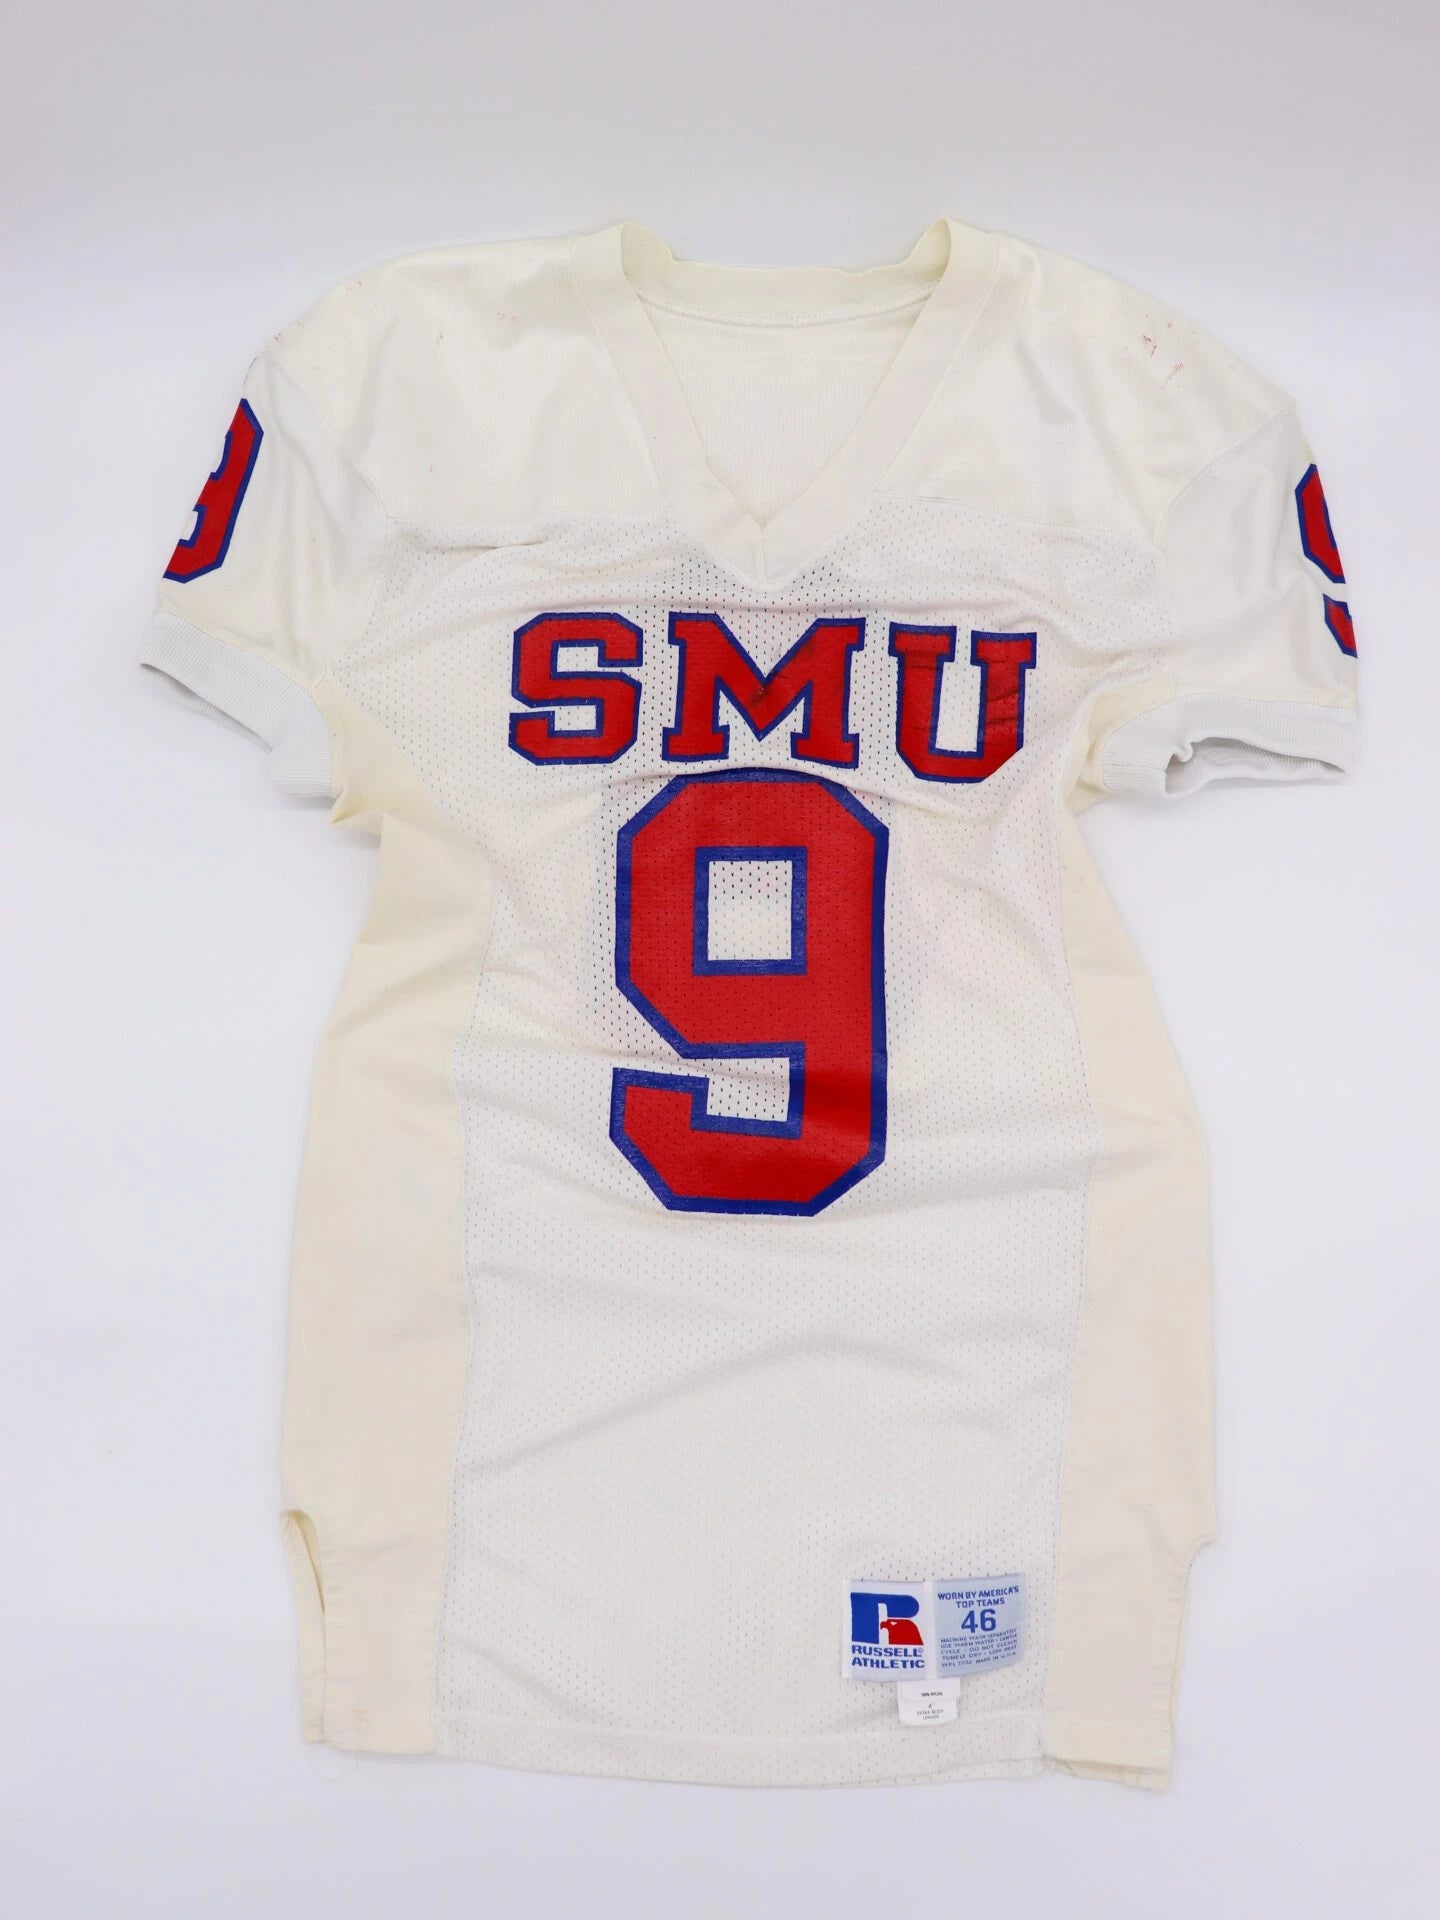 Game Worn 1990’s #9 D. Hall White SMU Mustangs Football White Road Football Jersey, Russell Athletic Size 46